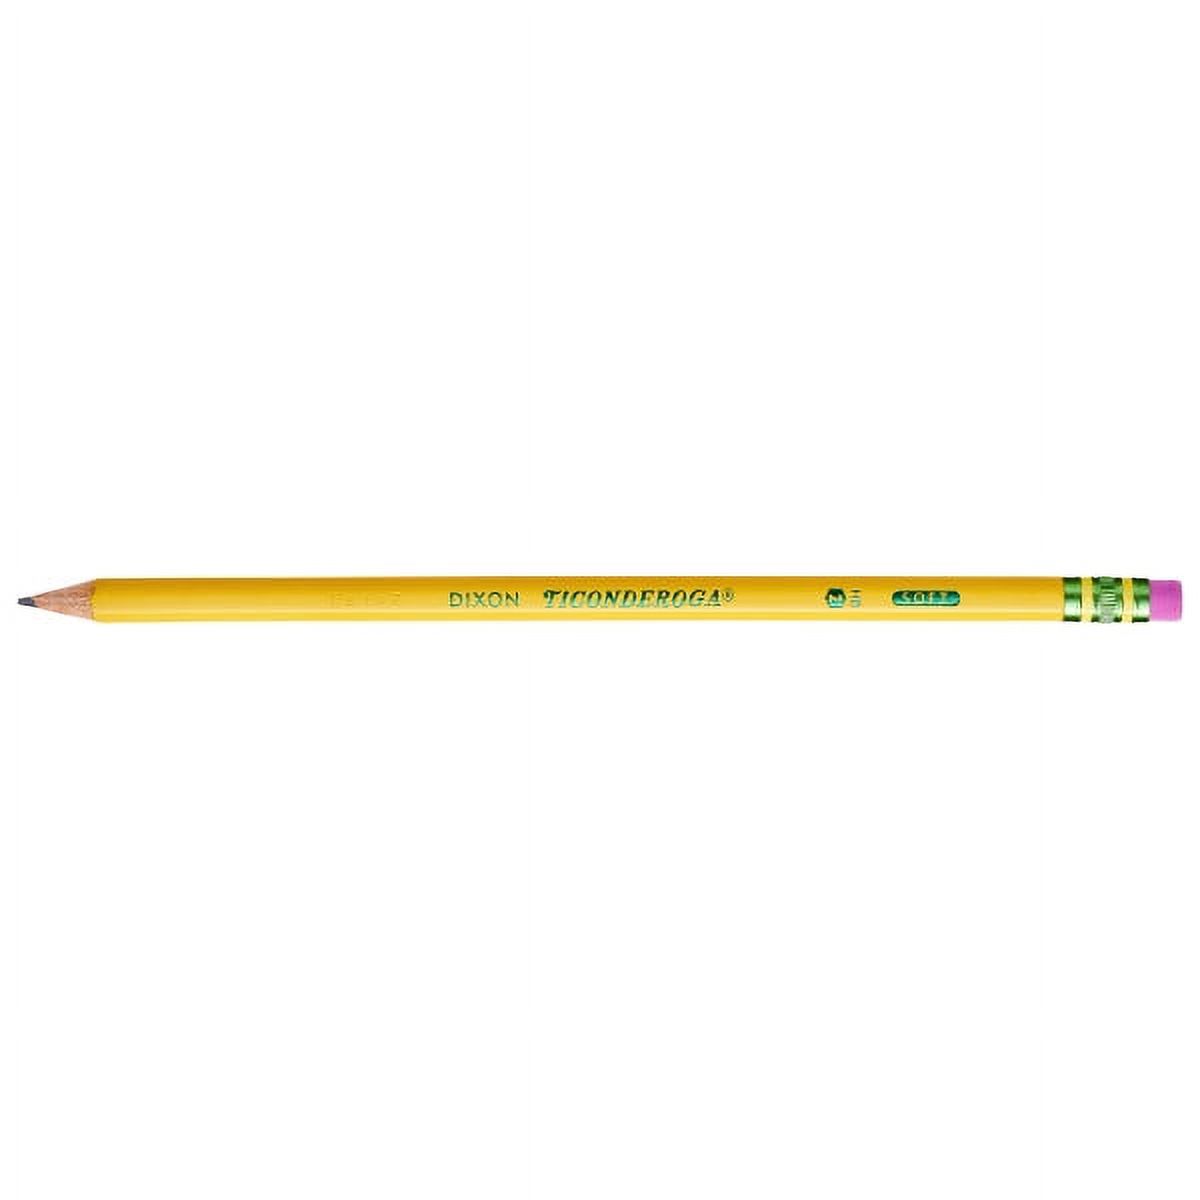 Ticonderoga 13818 #2 Sharpened The World's Best Pencils 18 Count (Pack of 1) - image 3 of 7